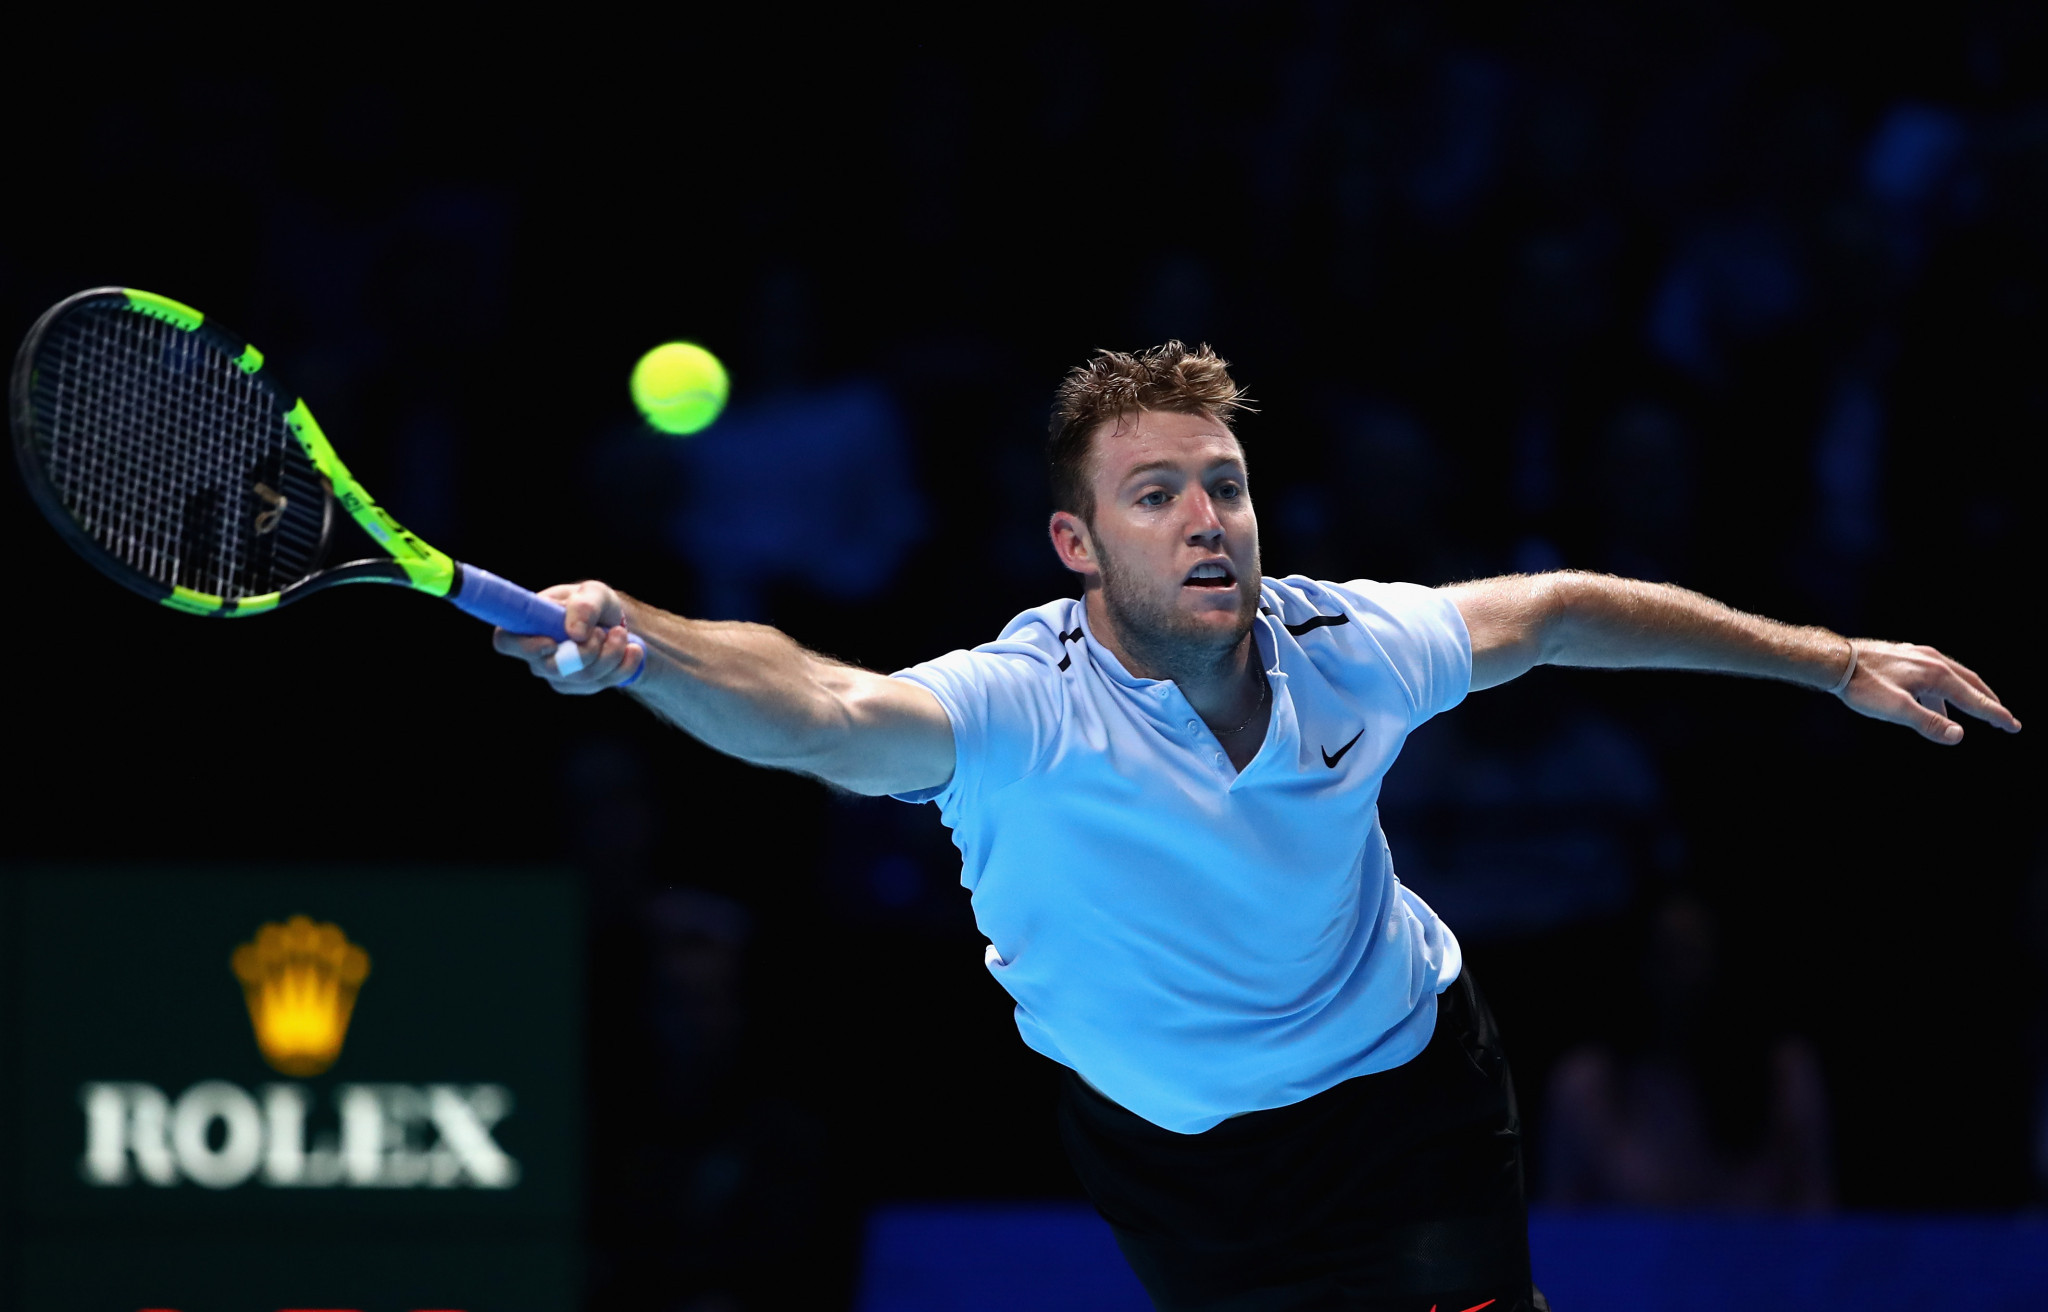 Jack Sock's next mission will be to defeat Germany's Alexander Zverev which will see him safely through to the last four in London ©Getty Images